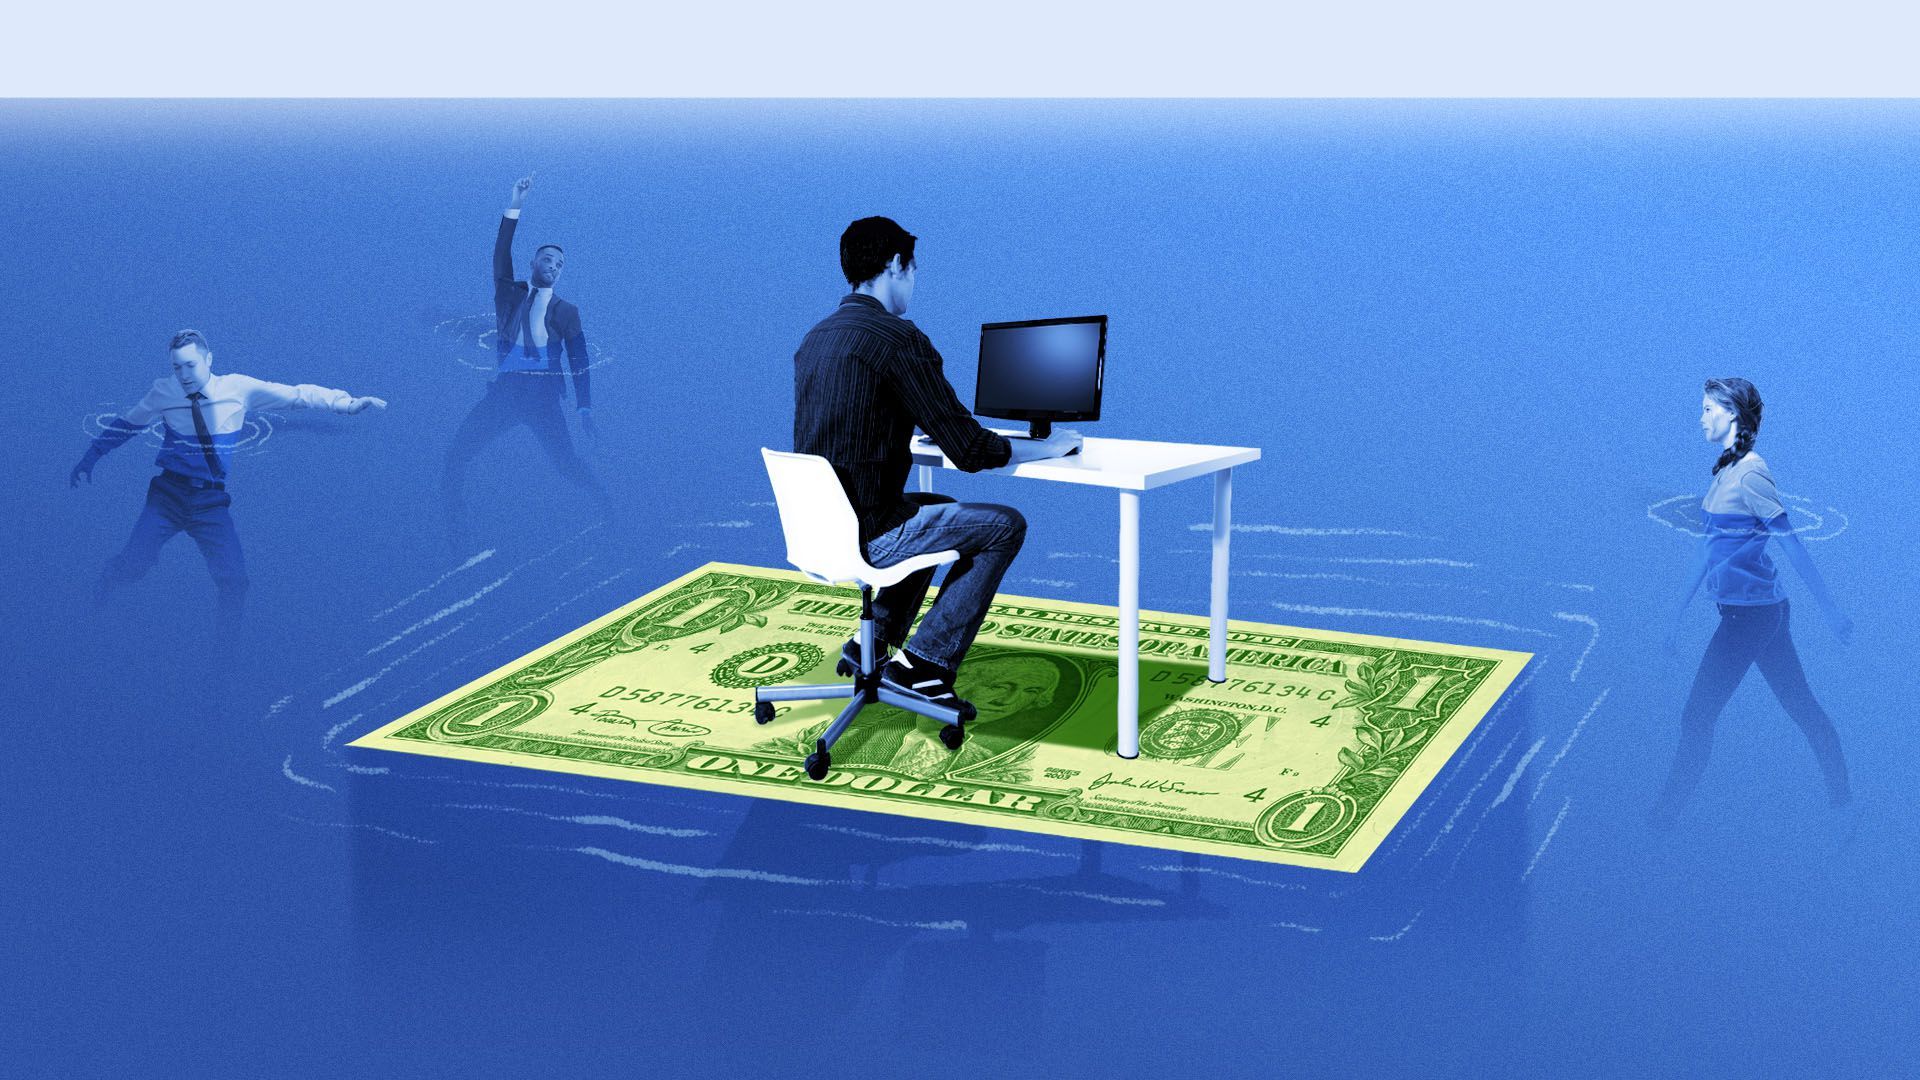 Illustration of a person at a office desk floating on a giant dollar in the ocean, with other people floating in the water